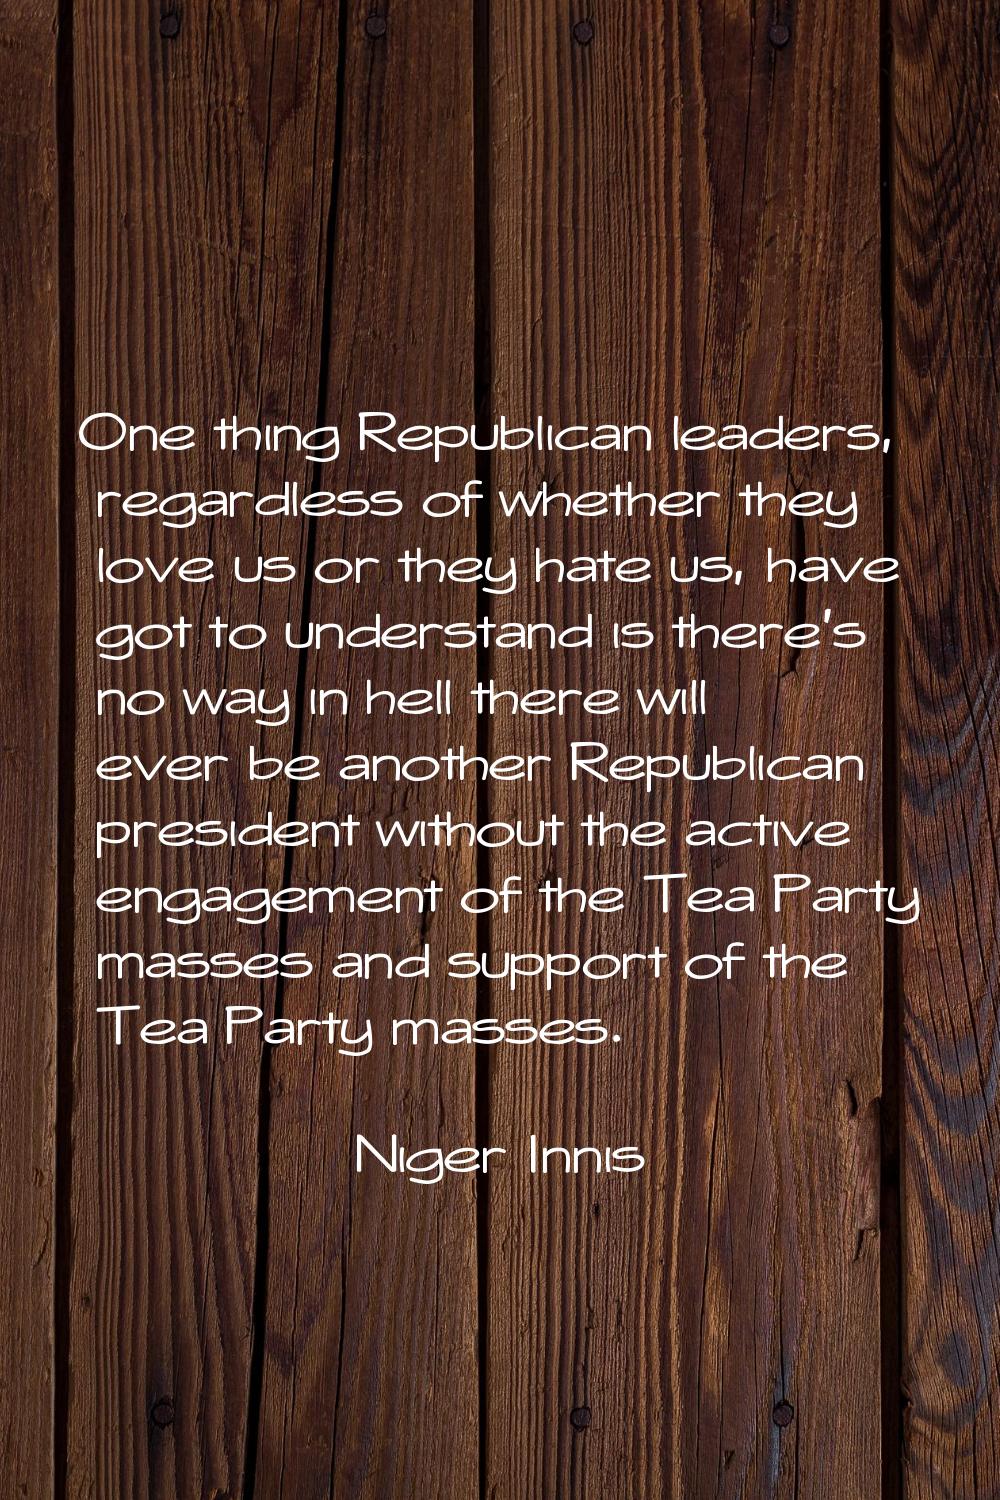 One thing Republican leaders, regardless of whether they love us or they hate us, have got to under